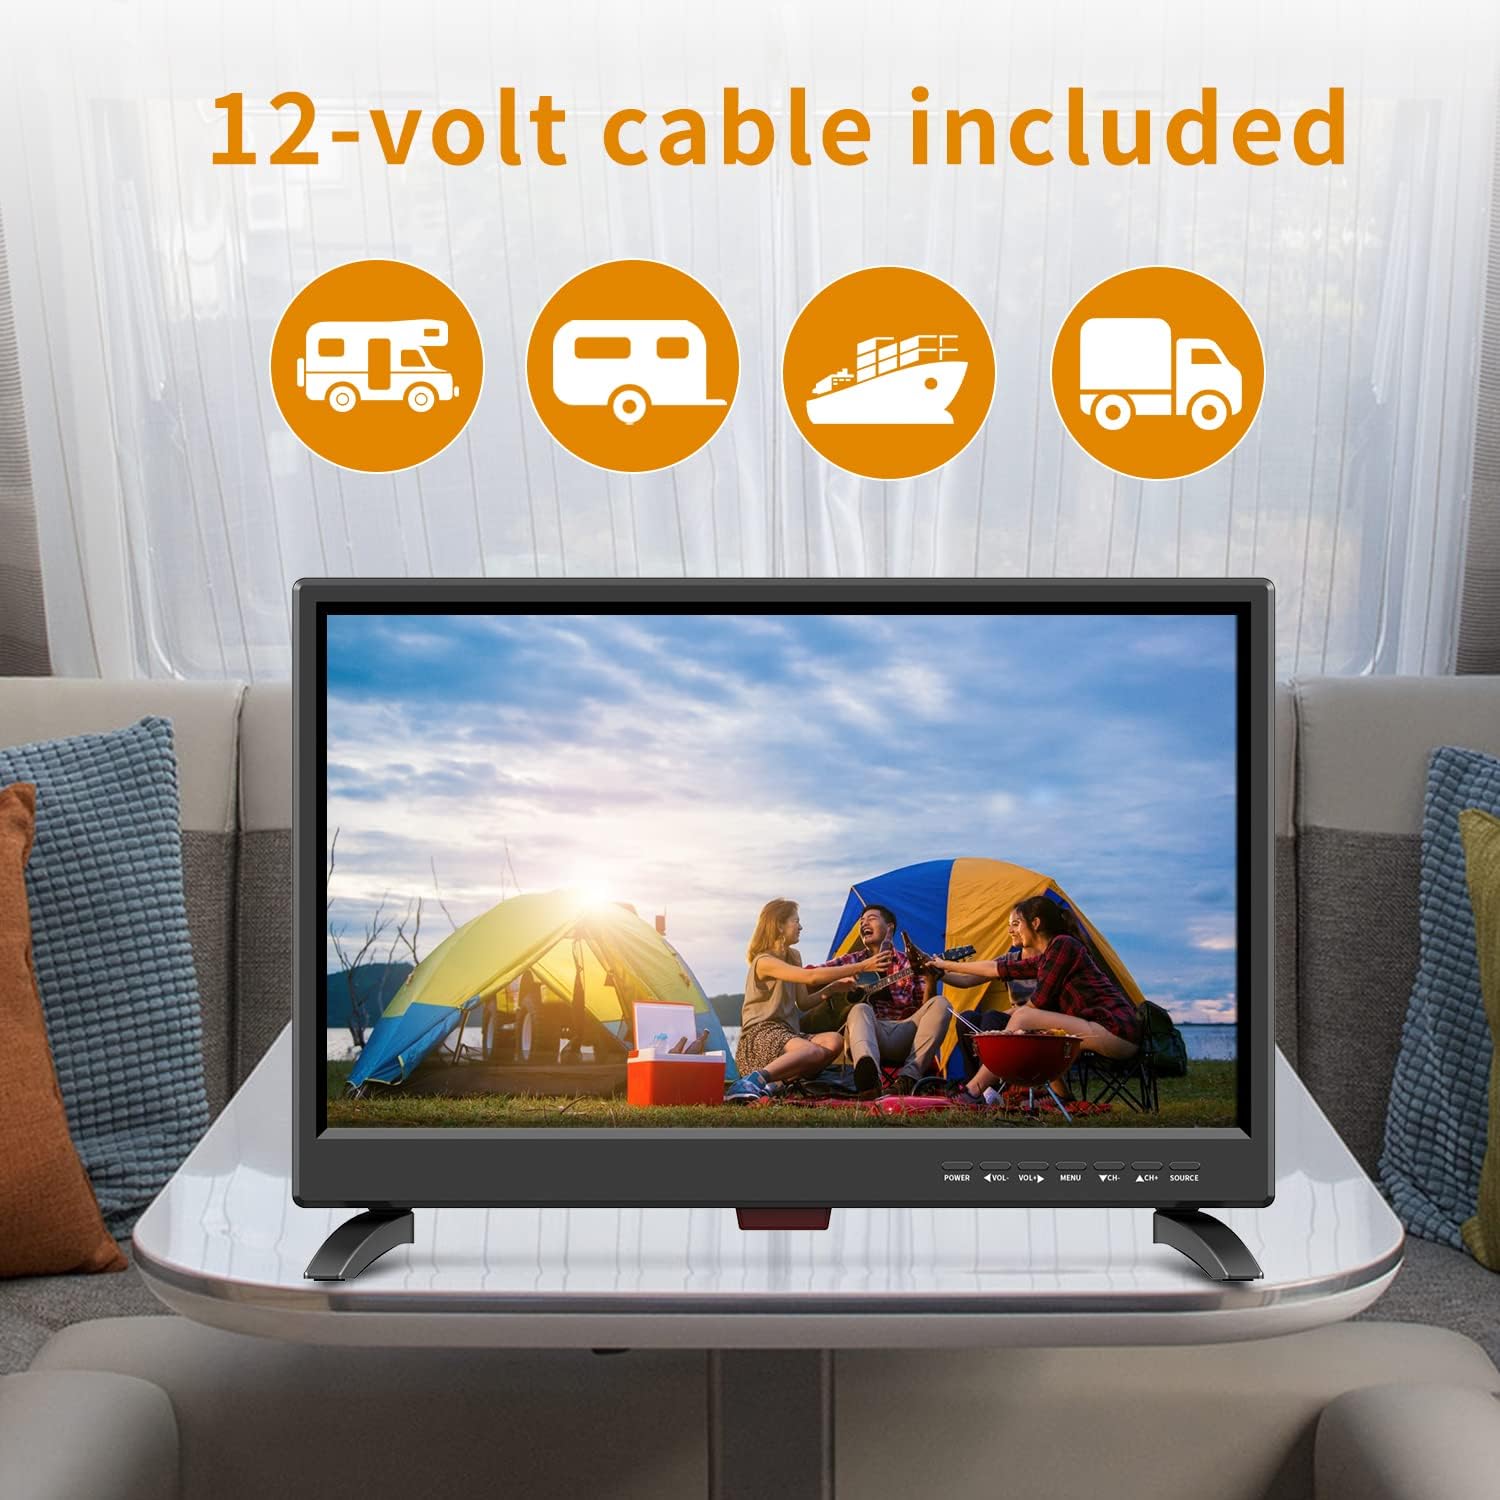 ZOSHING 19 inch Full HD 1080P LED TV,19 inch small tv with Digital T2 Tuner Freeview Receive,HDMI.VGA.USB slot,12 Volt charger cable for Small Lounge Kitchen Campervan(UK2023) - Amazing Gadgets Outlet